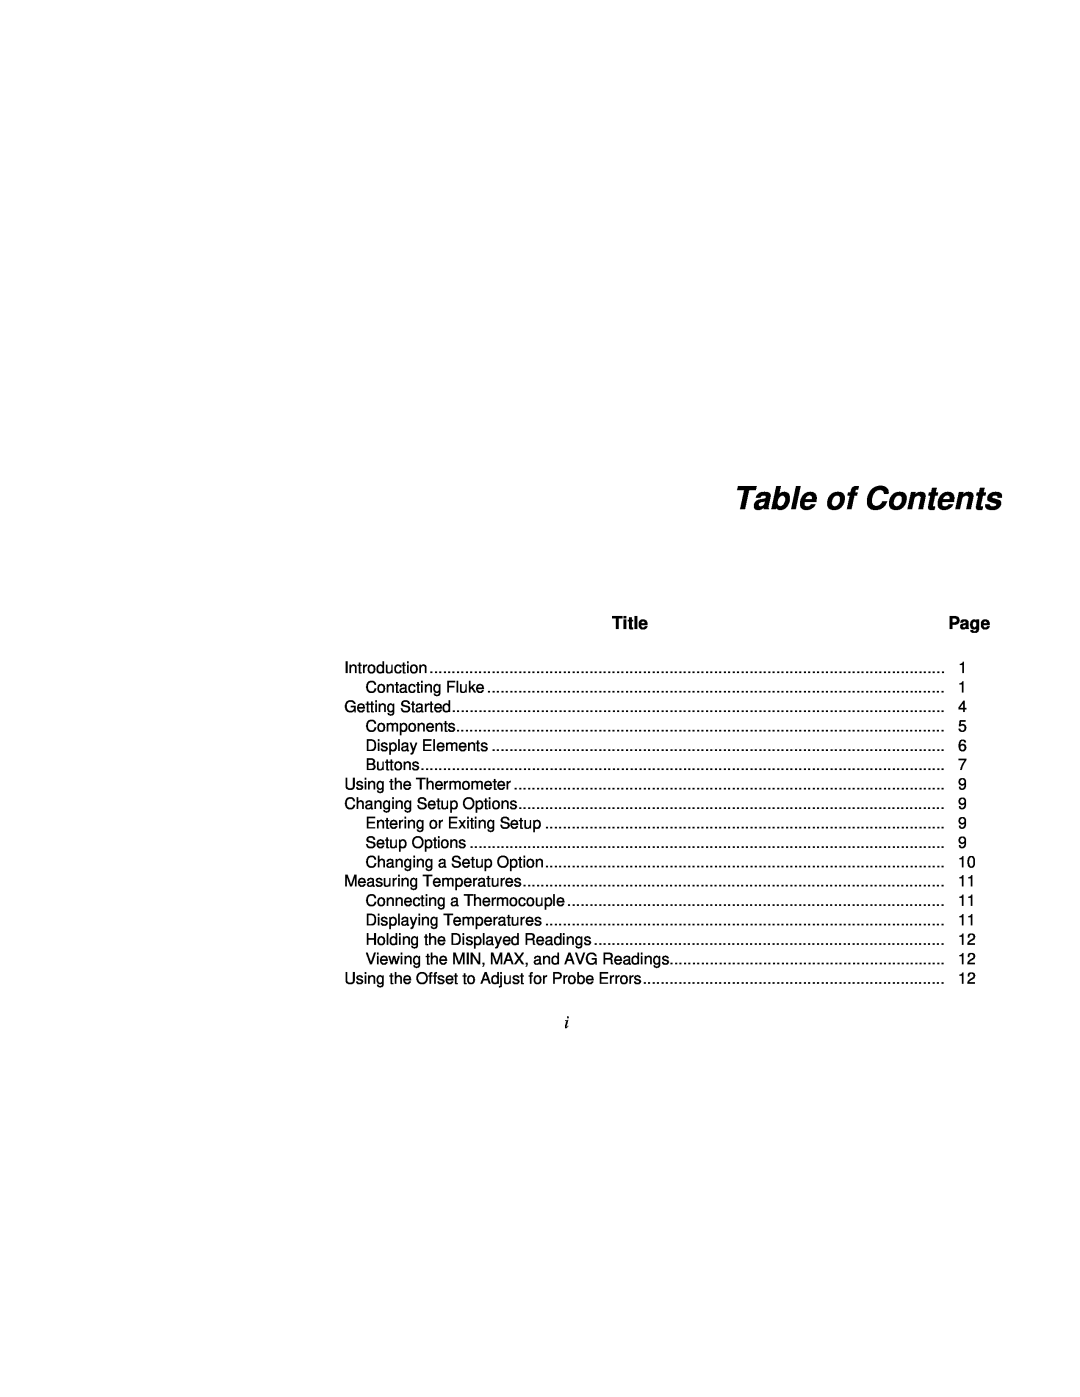 Fluke 52 Series, 51 Series user manual Table of Contents, Title 